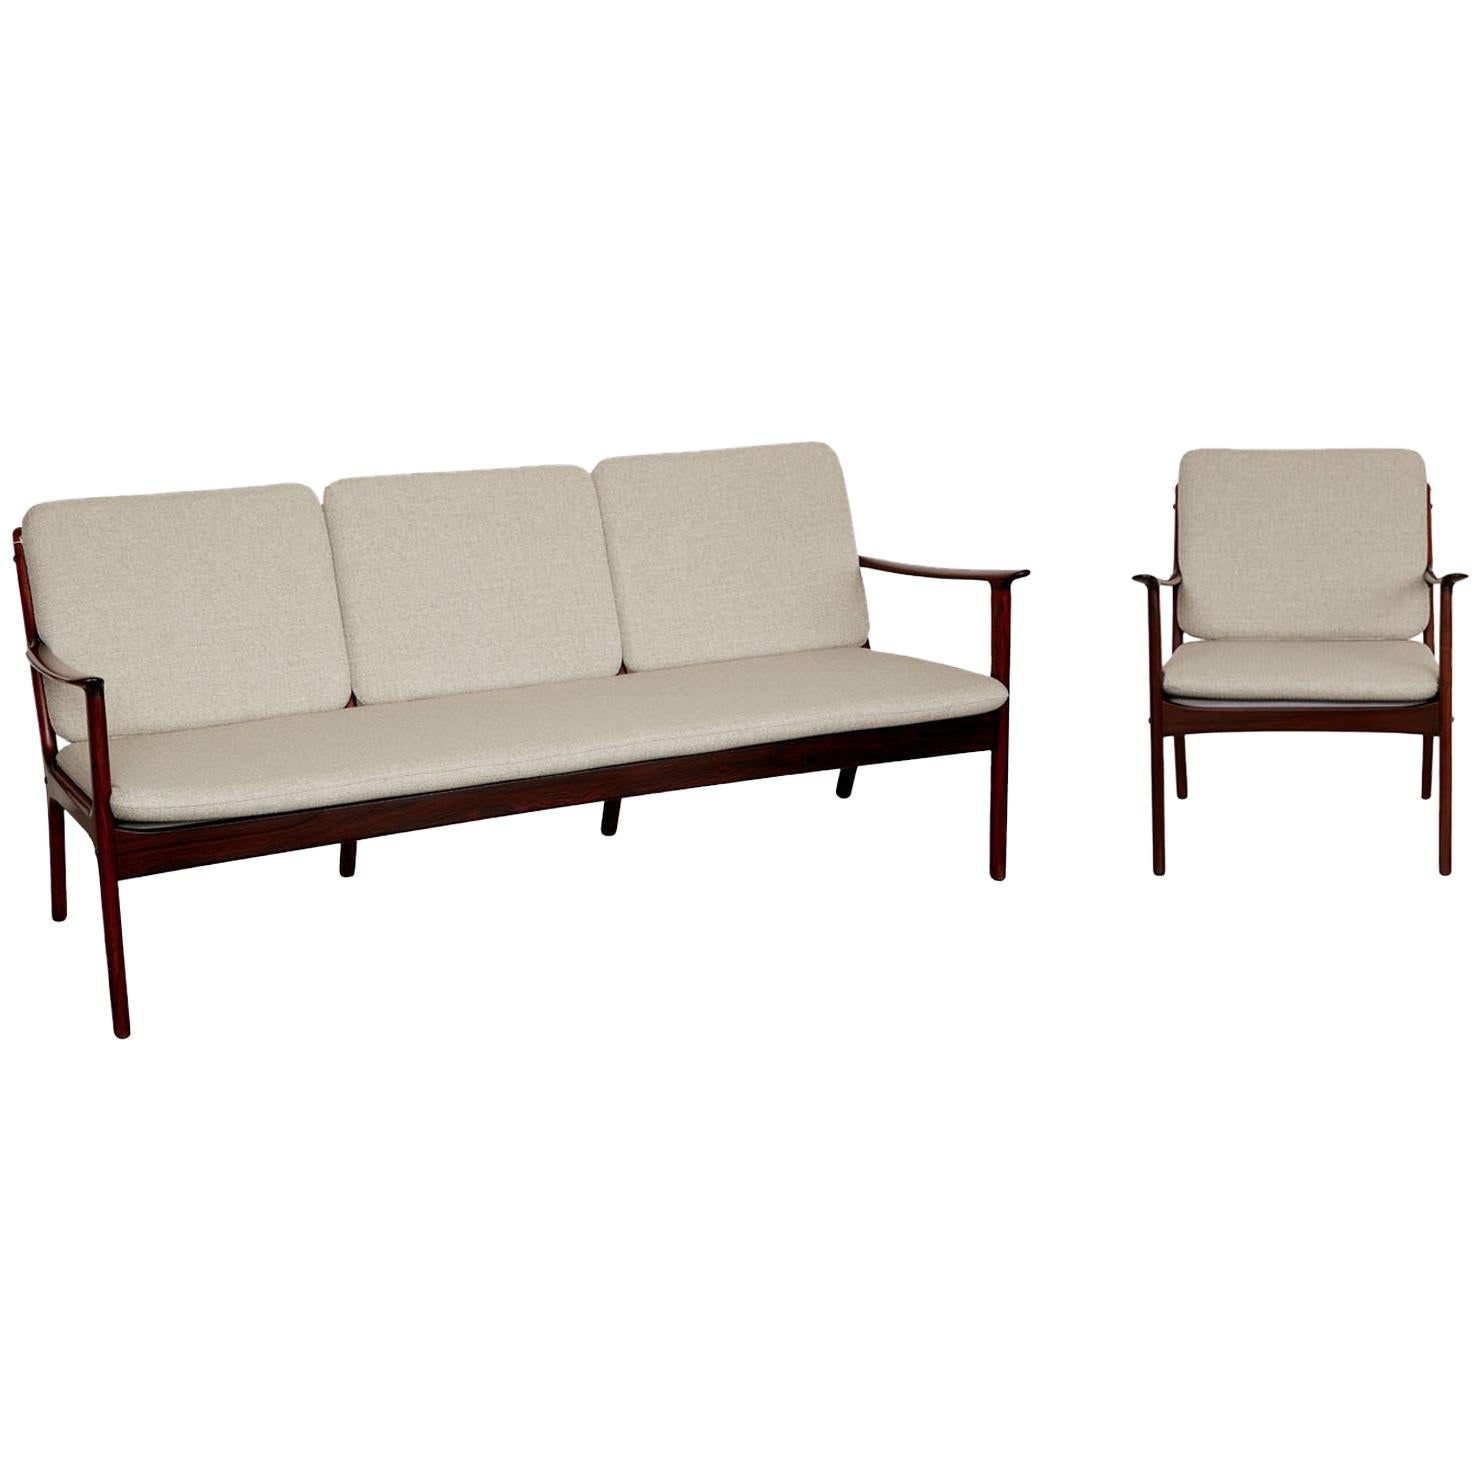 Ole Wanscher Rosewood Sofa and Chair Set For Sale